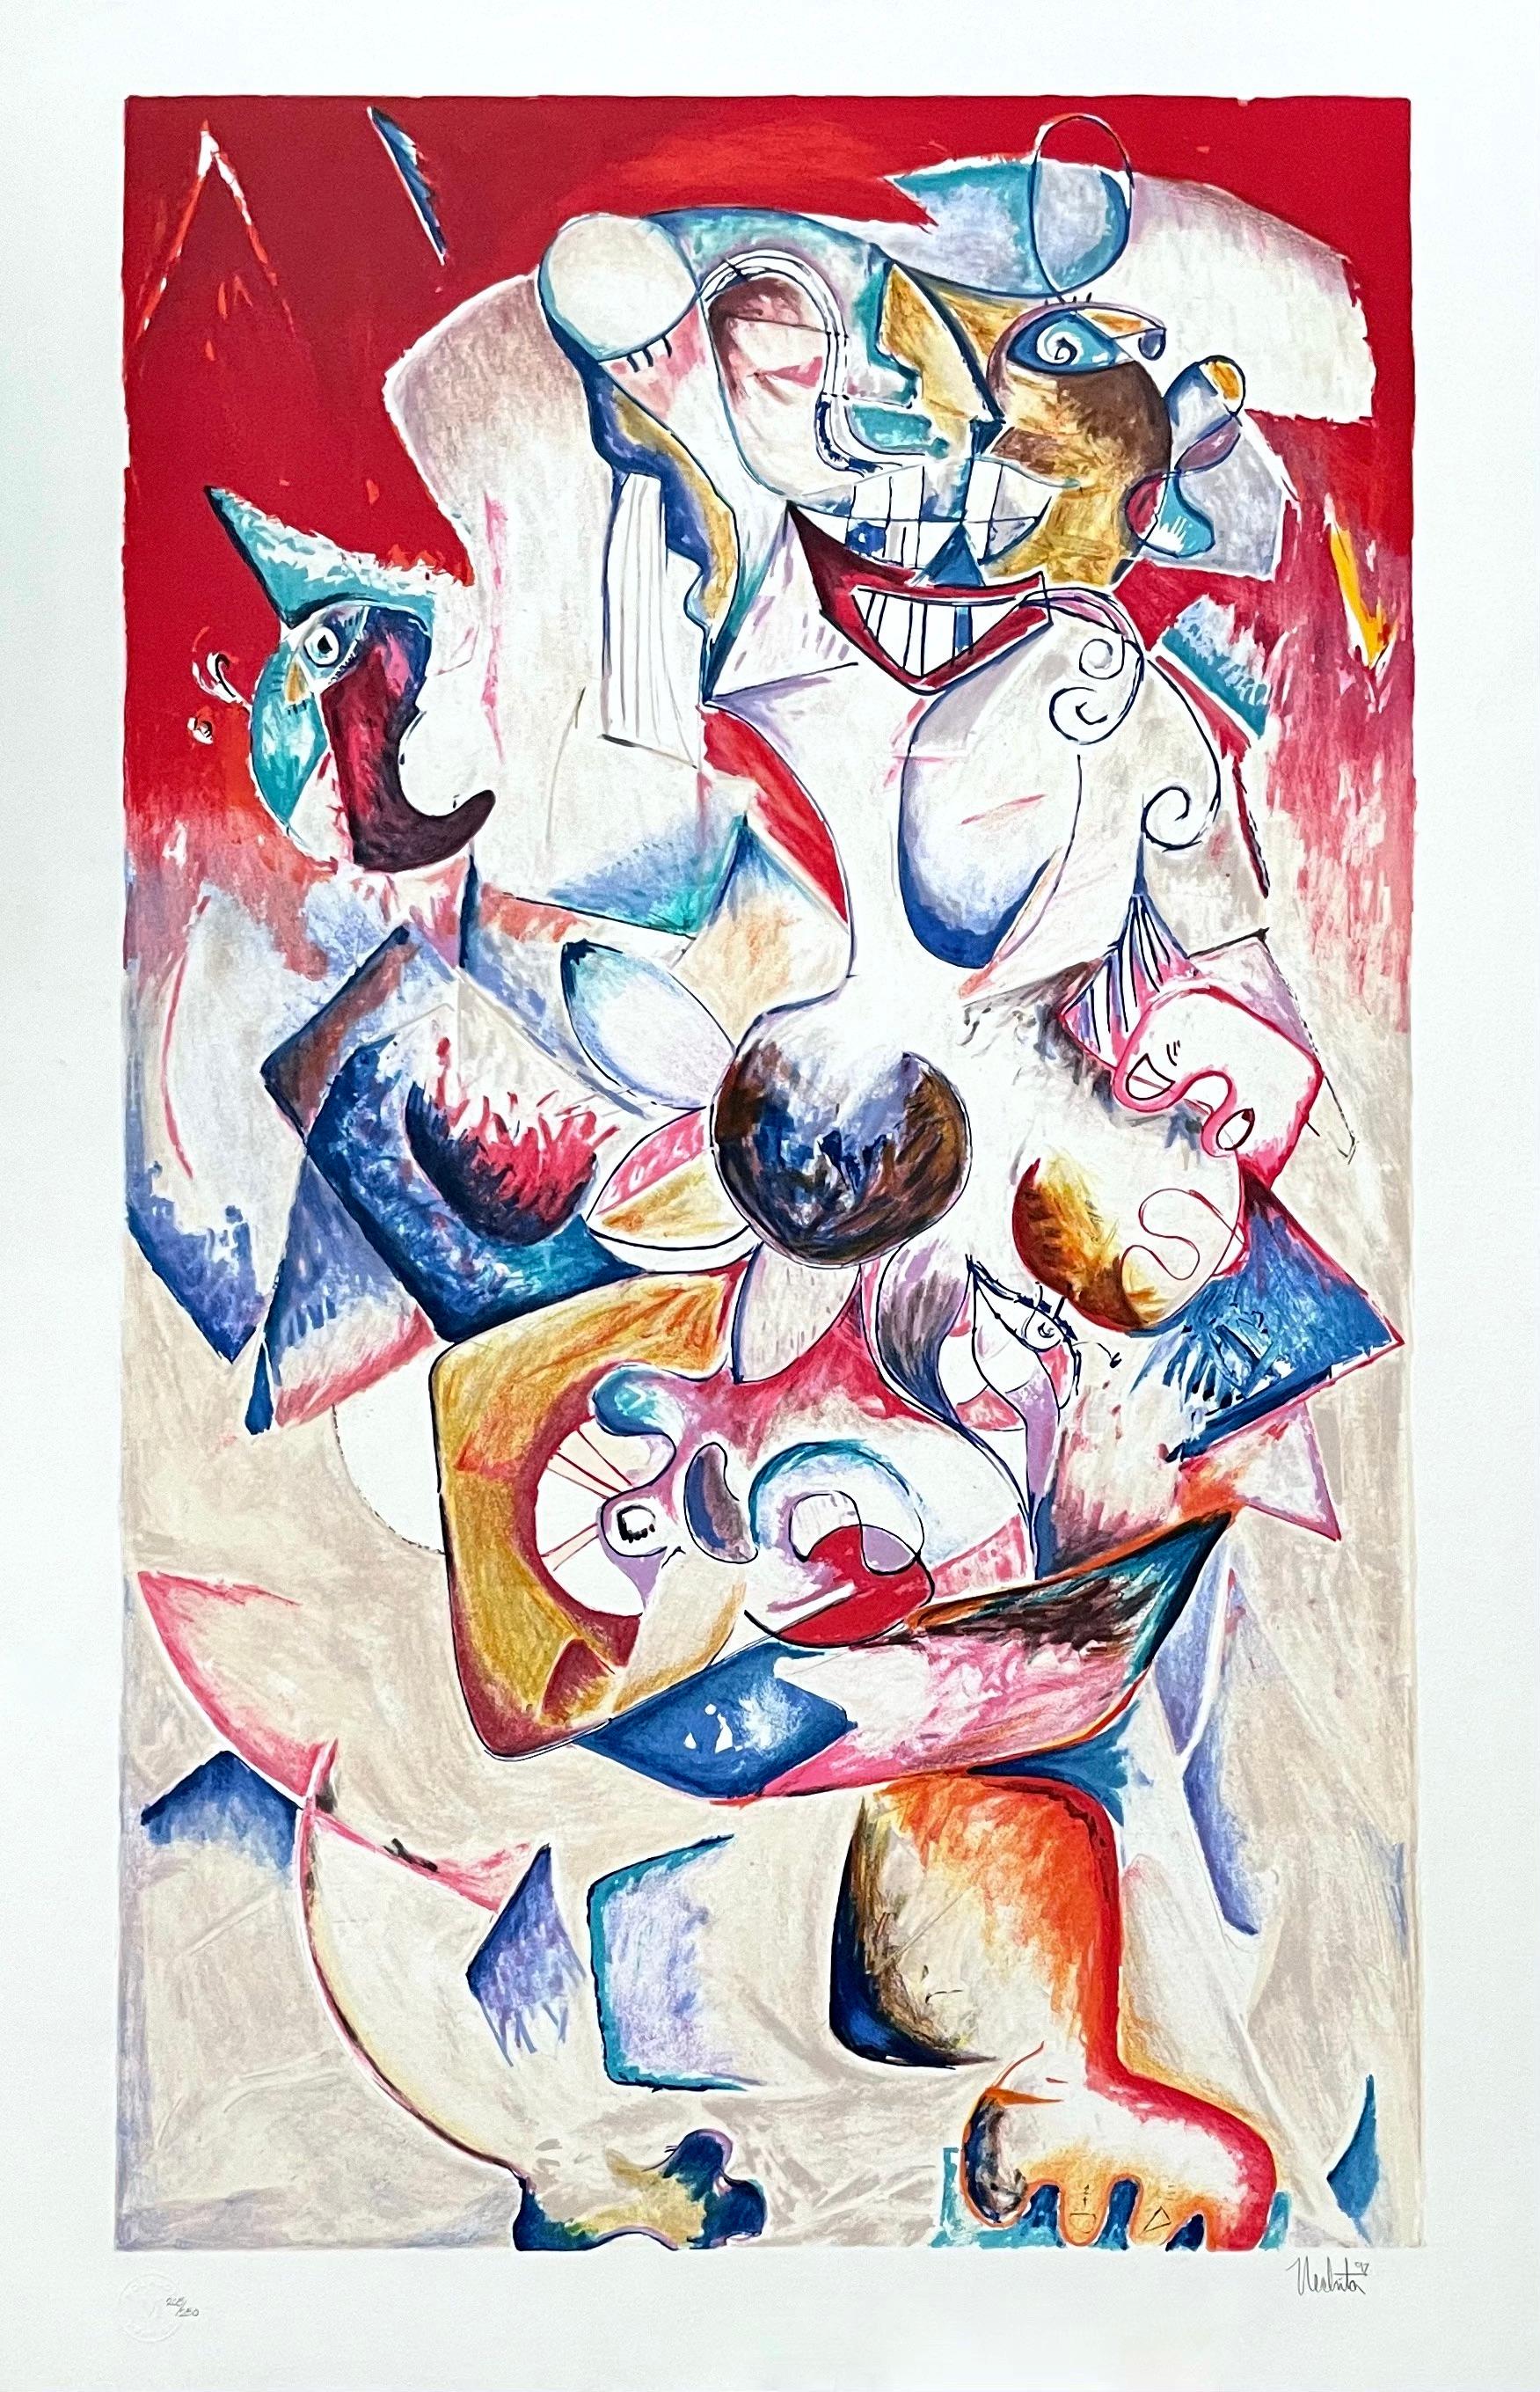 Artist: Alexandra Nechita (1985)
Title: Spring Love
Year: 1997
Edition: 205/250, plus proofs
Medium: Lithograph on Arches paper
Size: 36 x 25 inches
Condition: Excellent
Inscription: Signed and numbered by the artist.
Notes: Atelier Idem (formerly